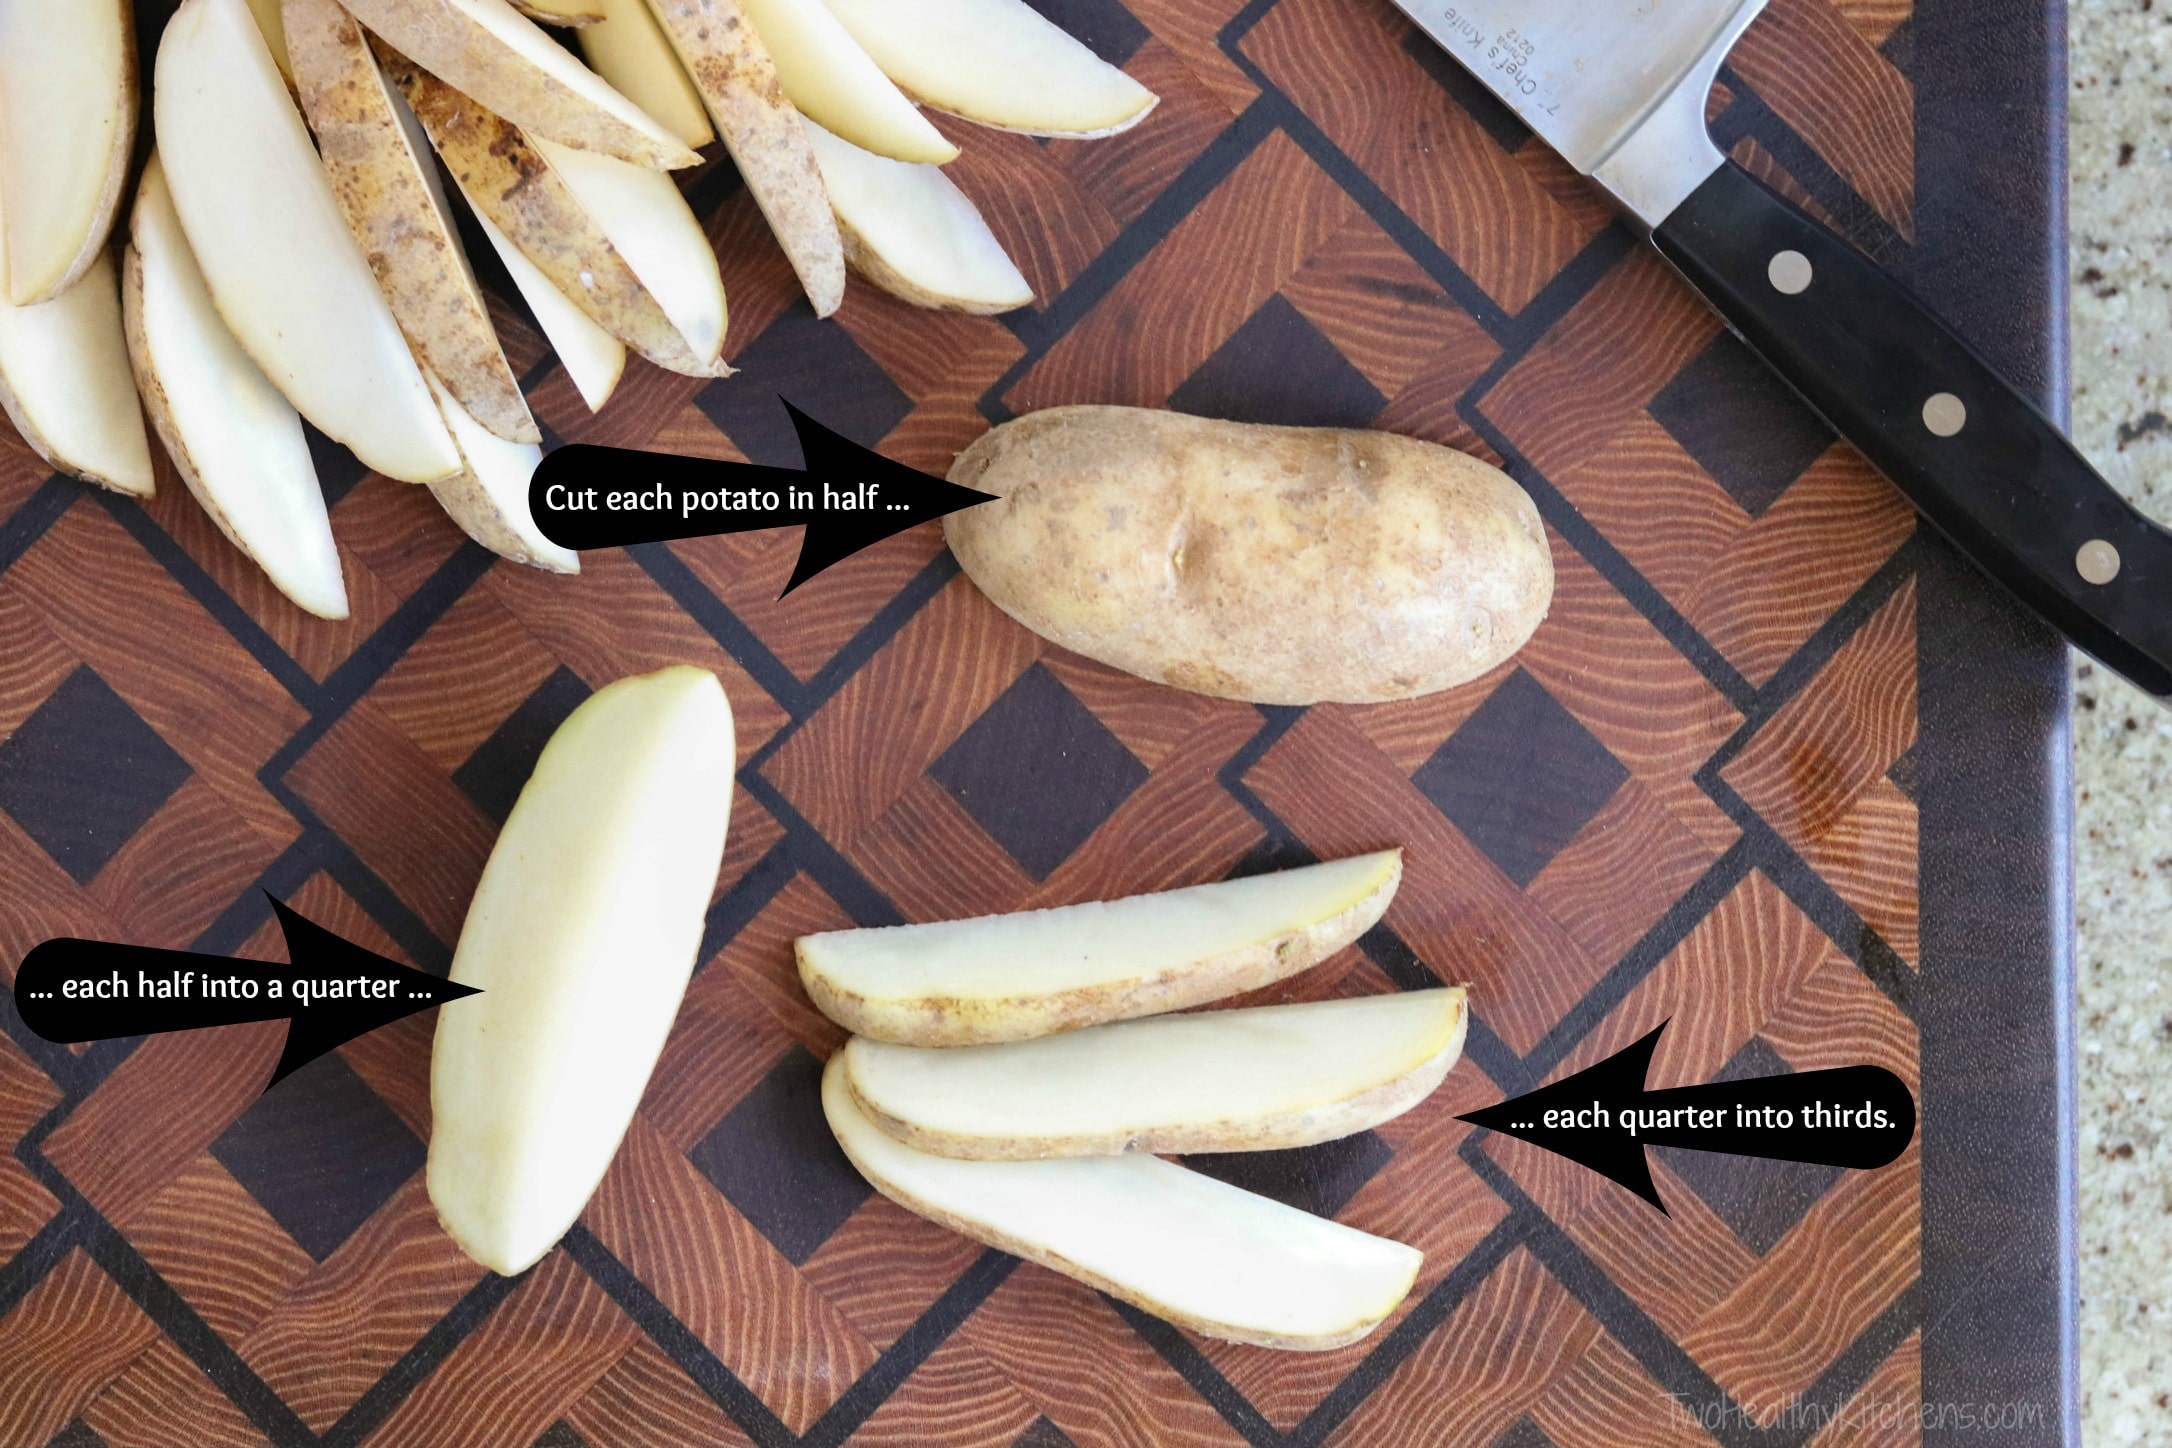 Potatoes laid on cutting board with arrows pointing to show how to cut them to the right thickness for pizza fries.